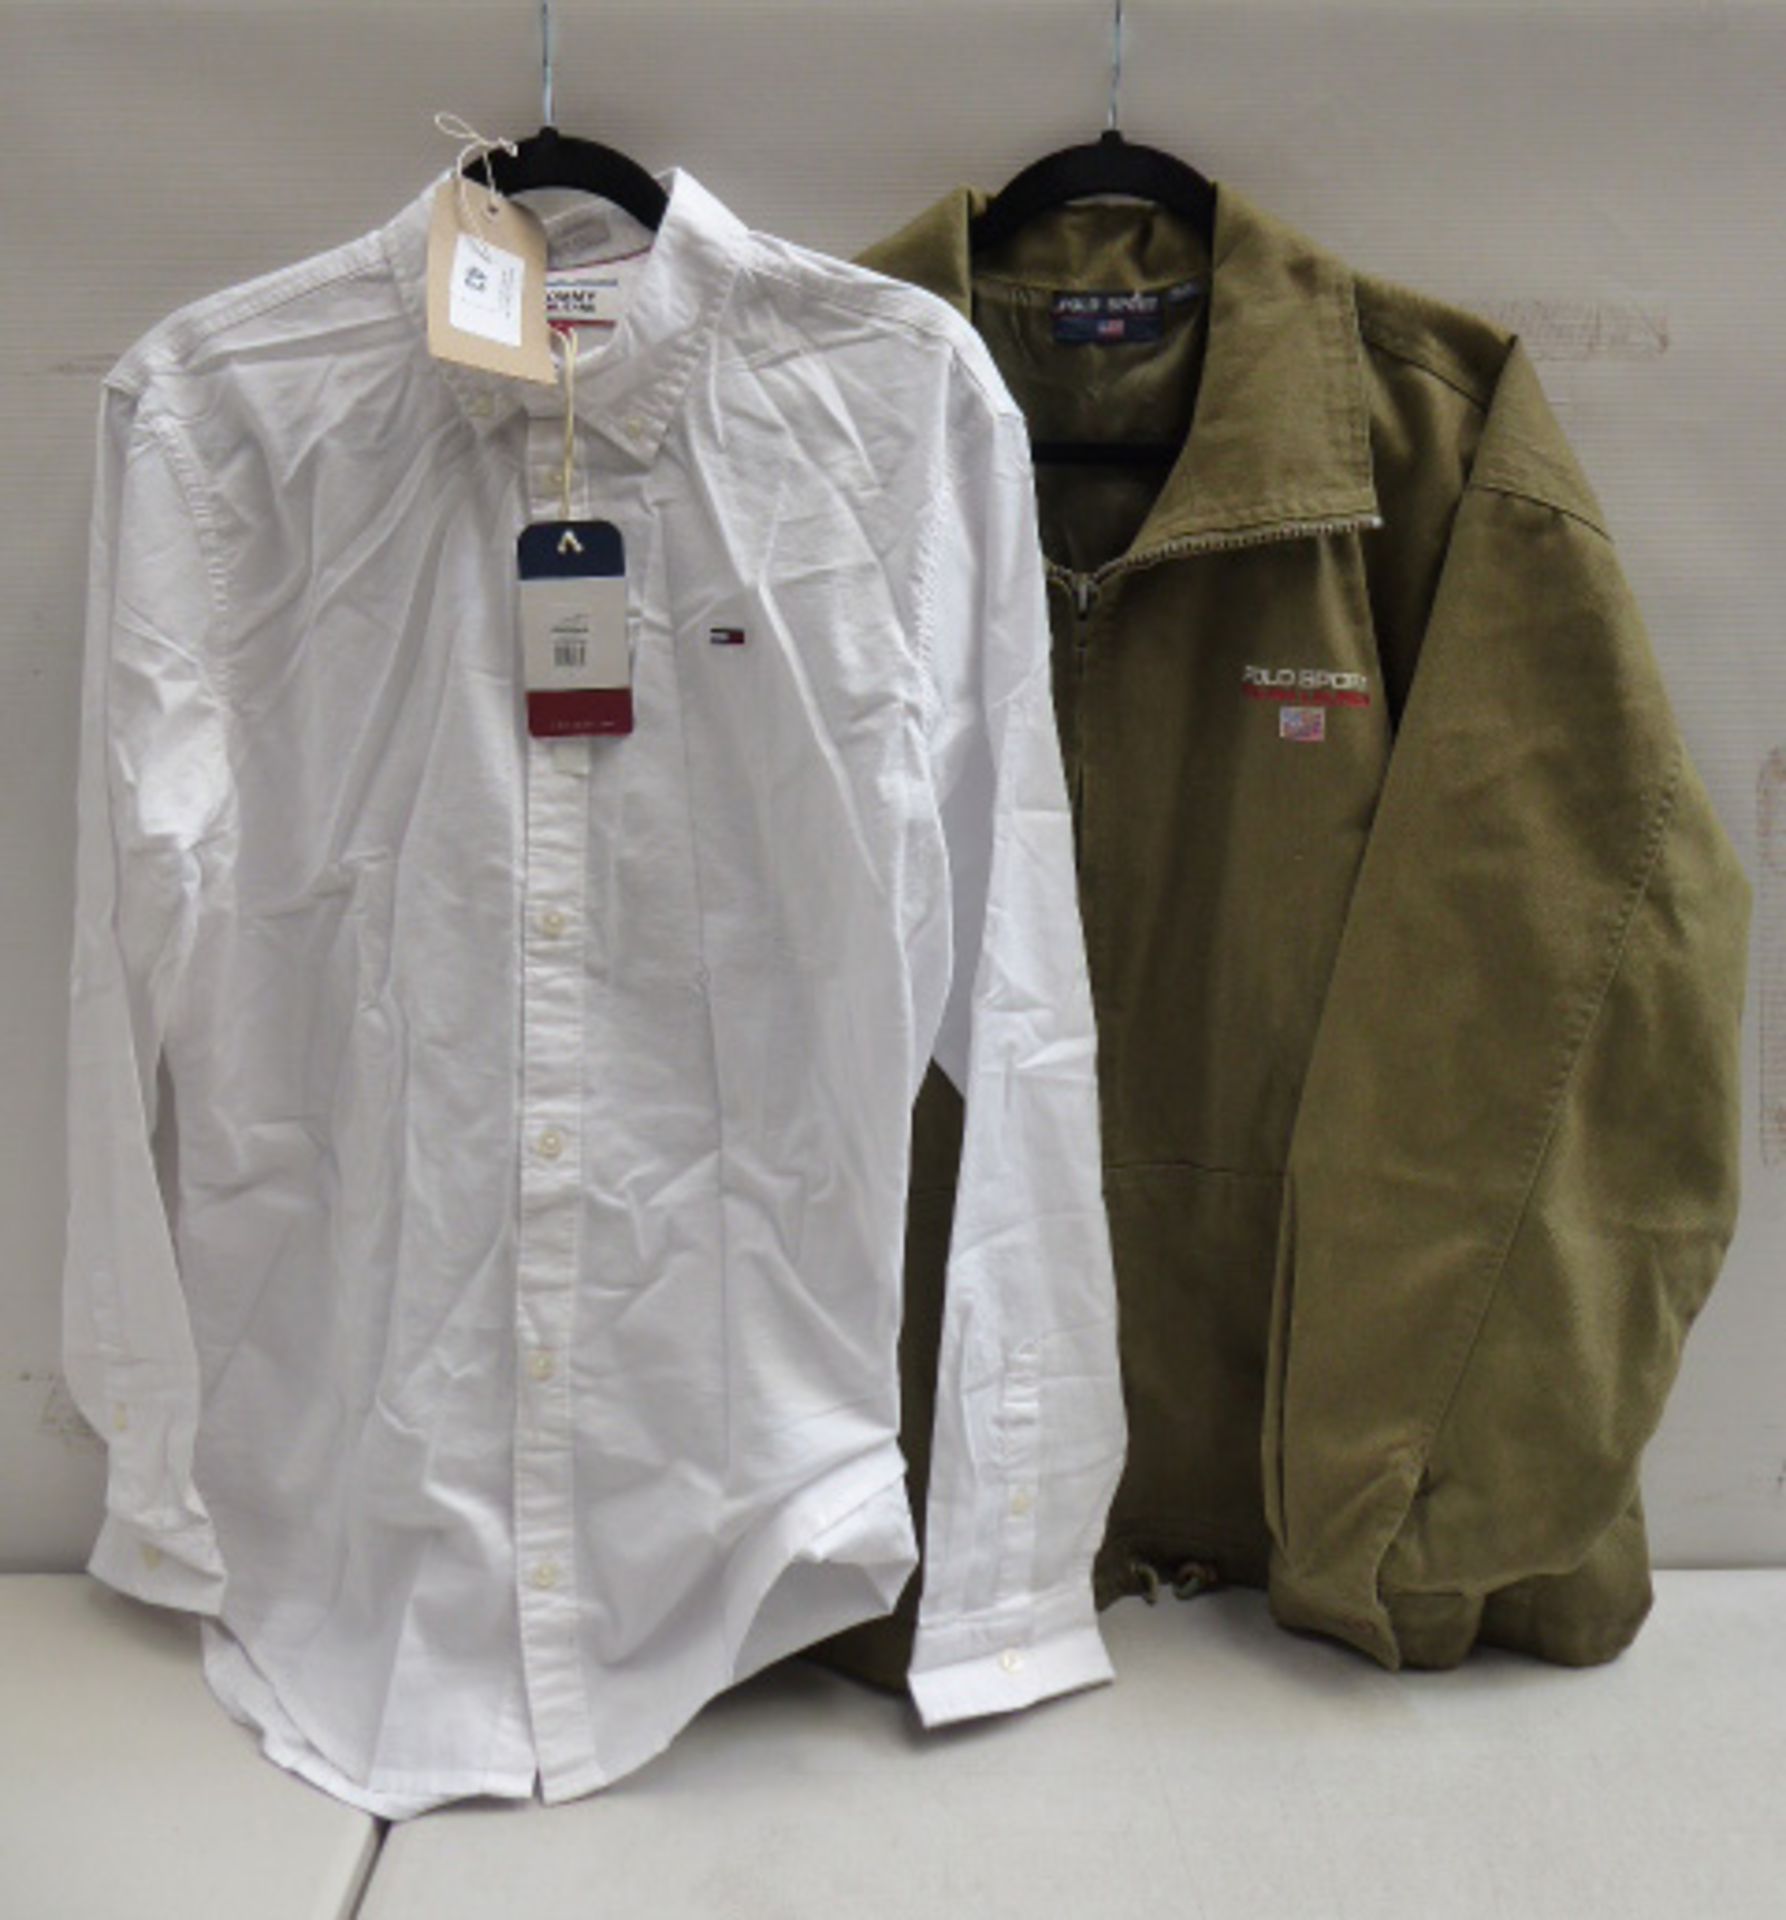 Tommy Hilfiger Jeans white shirt size large and Ralph Lauren Polo Sport green harrington jacket size